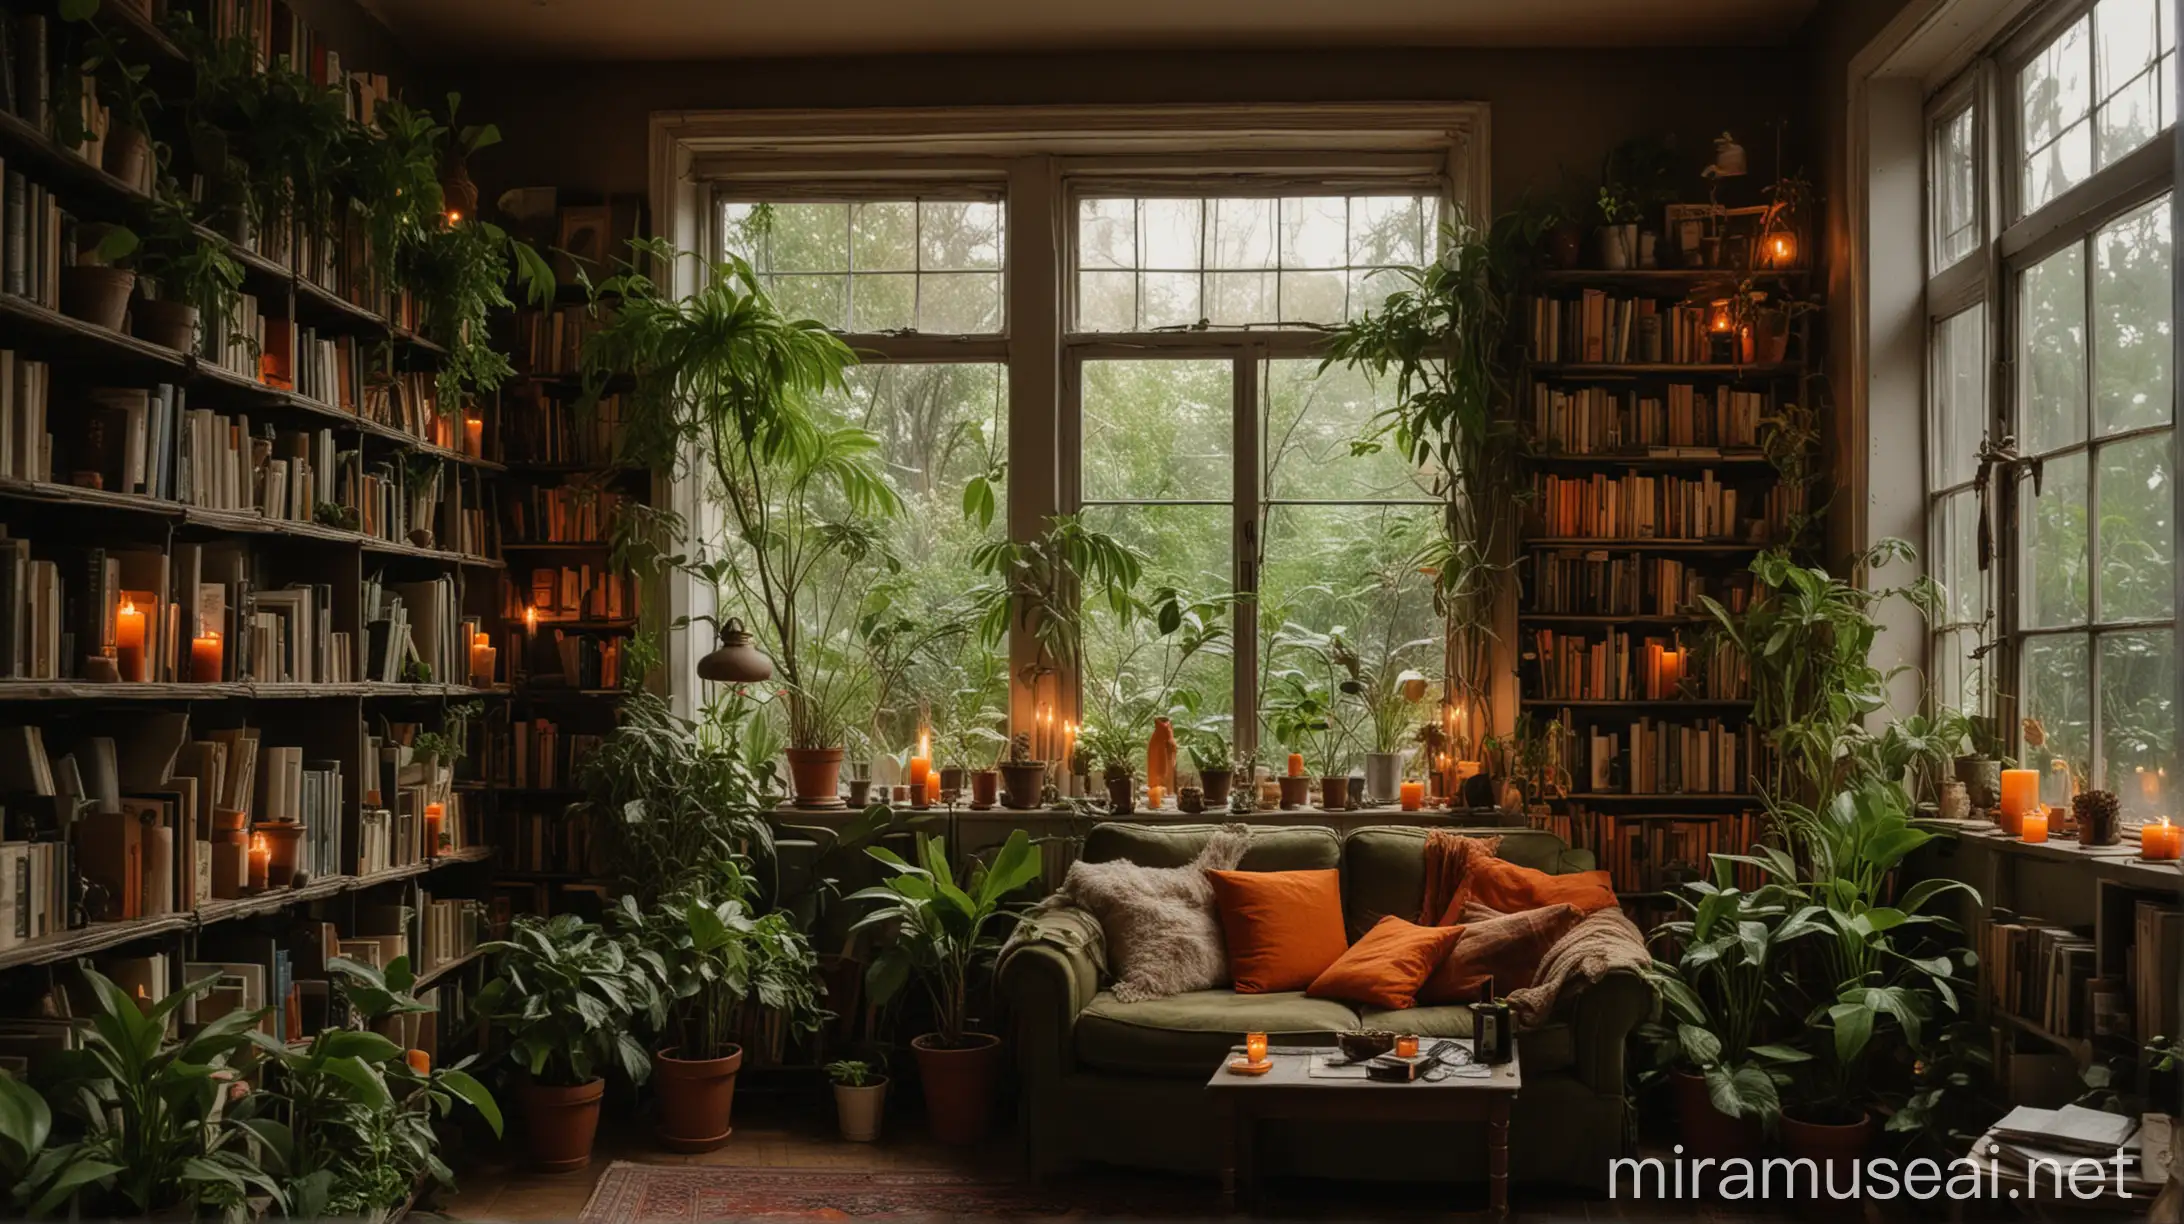 can you make a old vibe library with plants, lots of green, orange candle  light, natural light, with some older art 